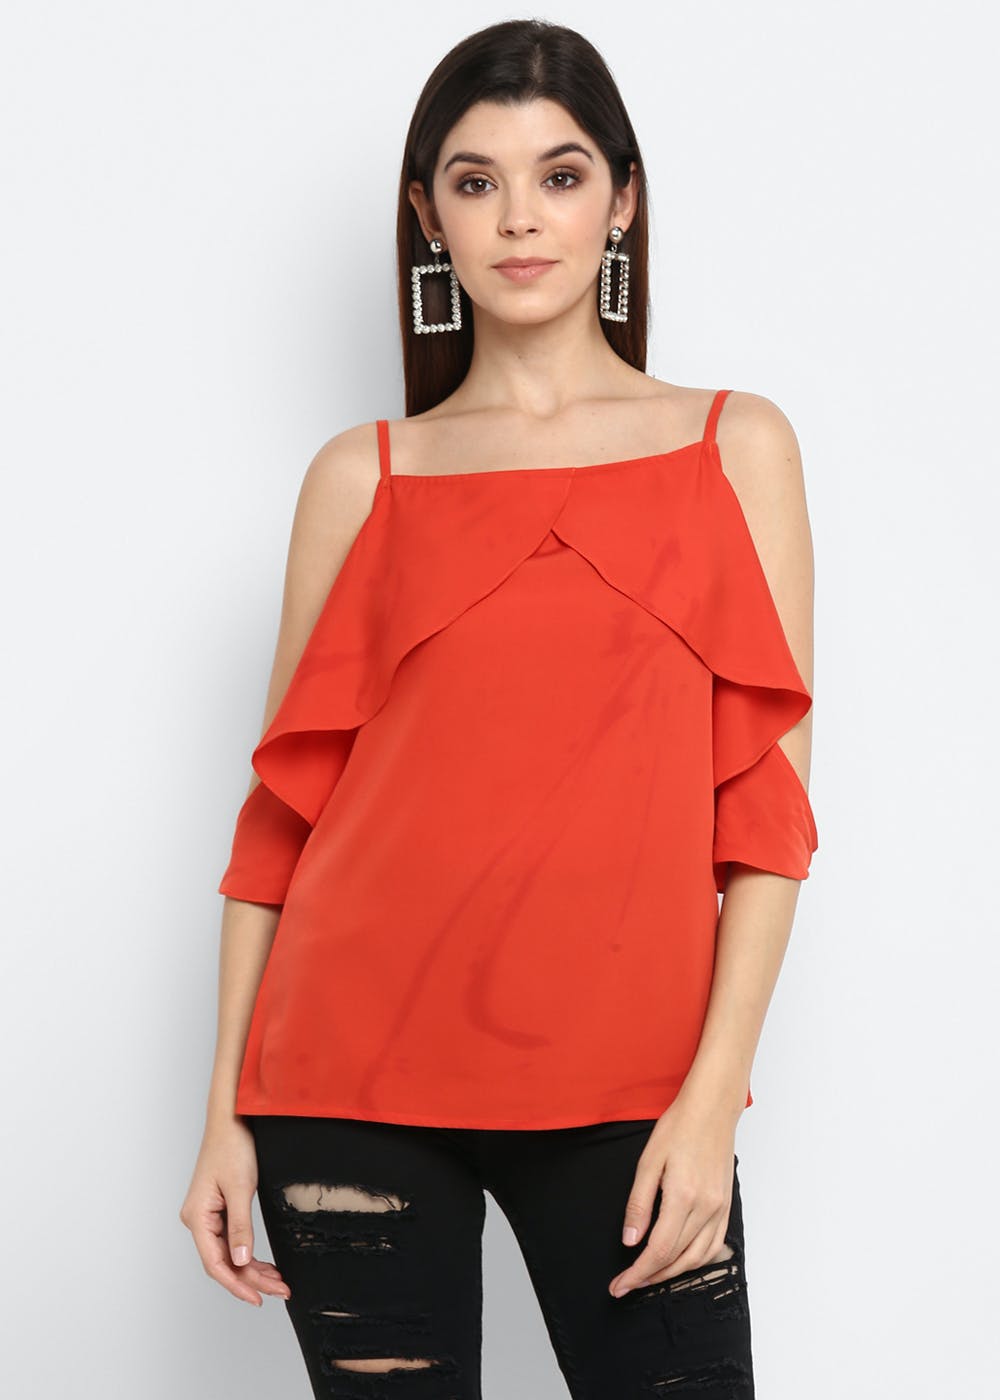 Get Ruffled Patch Orange Strappy Top at ₹ 399 | LBB Shop